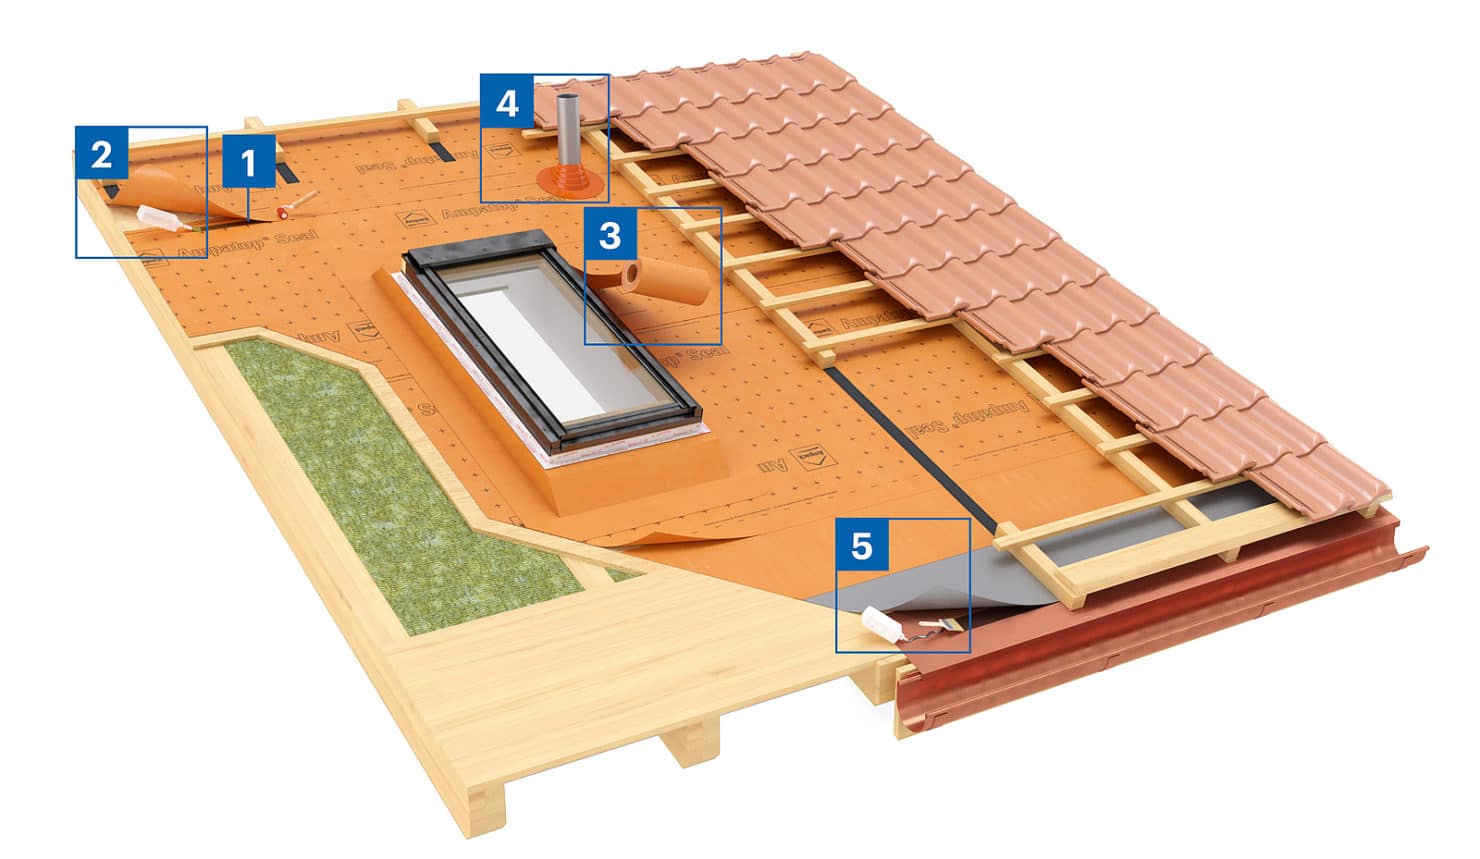 Material in action.

This image shows the Ampatop Seal membrane being used on a low pitch roof. Numbers 1 and 2 are the Ampacoll LiquiSeal and LiquiSeal Applicator, used for bonding the laps in the membrane. Number 3 is the Ampatop SealStripe which is a strip of the membrane used for forming around penetrations, such as roof lights. Number 4 is the Ampacoll TubeSeal which is a purpose made collar for sealing around any vent pipes or other protrusions and finally, number 5 is the Ampatop SealEdge eaves roll which is a UV resistant roll suitable for edging the membrane along the eaves. This ensures a permanently UV stable and watertight edge is formed.